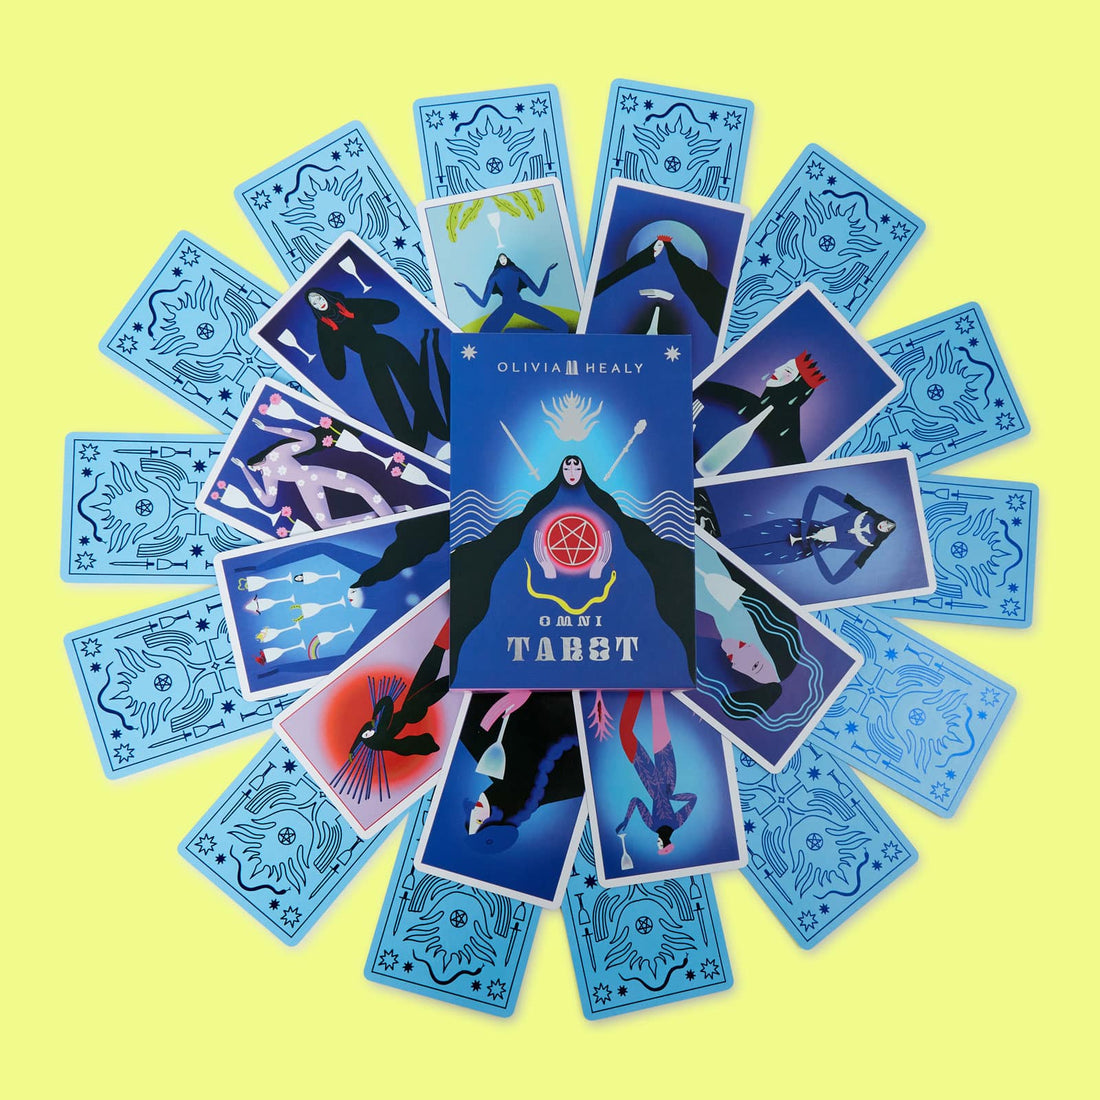 OMNI TAROT DECK CONTENTS BY OLIVIA M HEALY